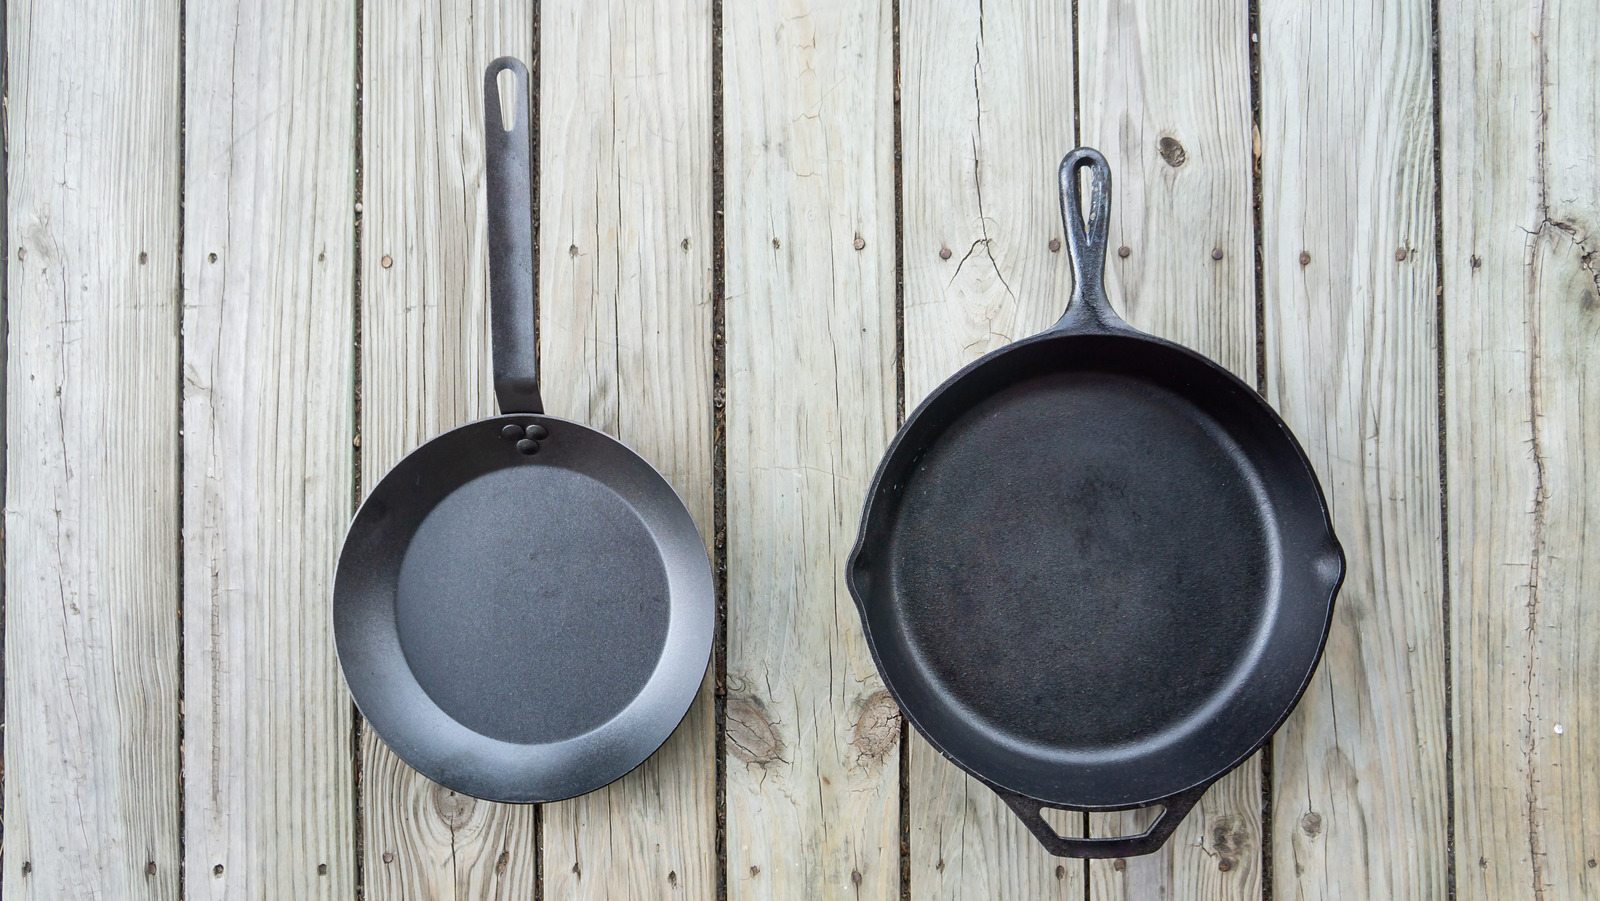 https://www.thedailymeal.com/img/gallery/how-do-carbon-steel-pans-compare-to-cast-iron/l-intro-1674743121.jpg